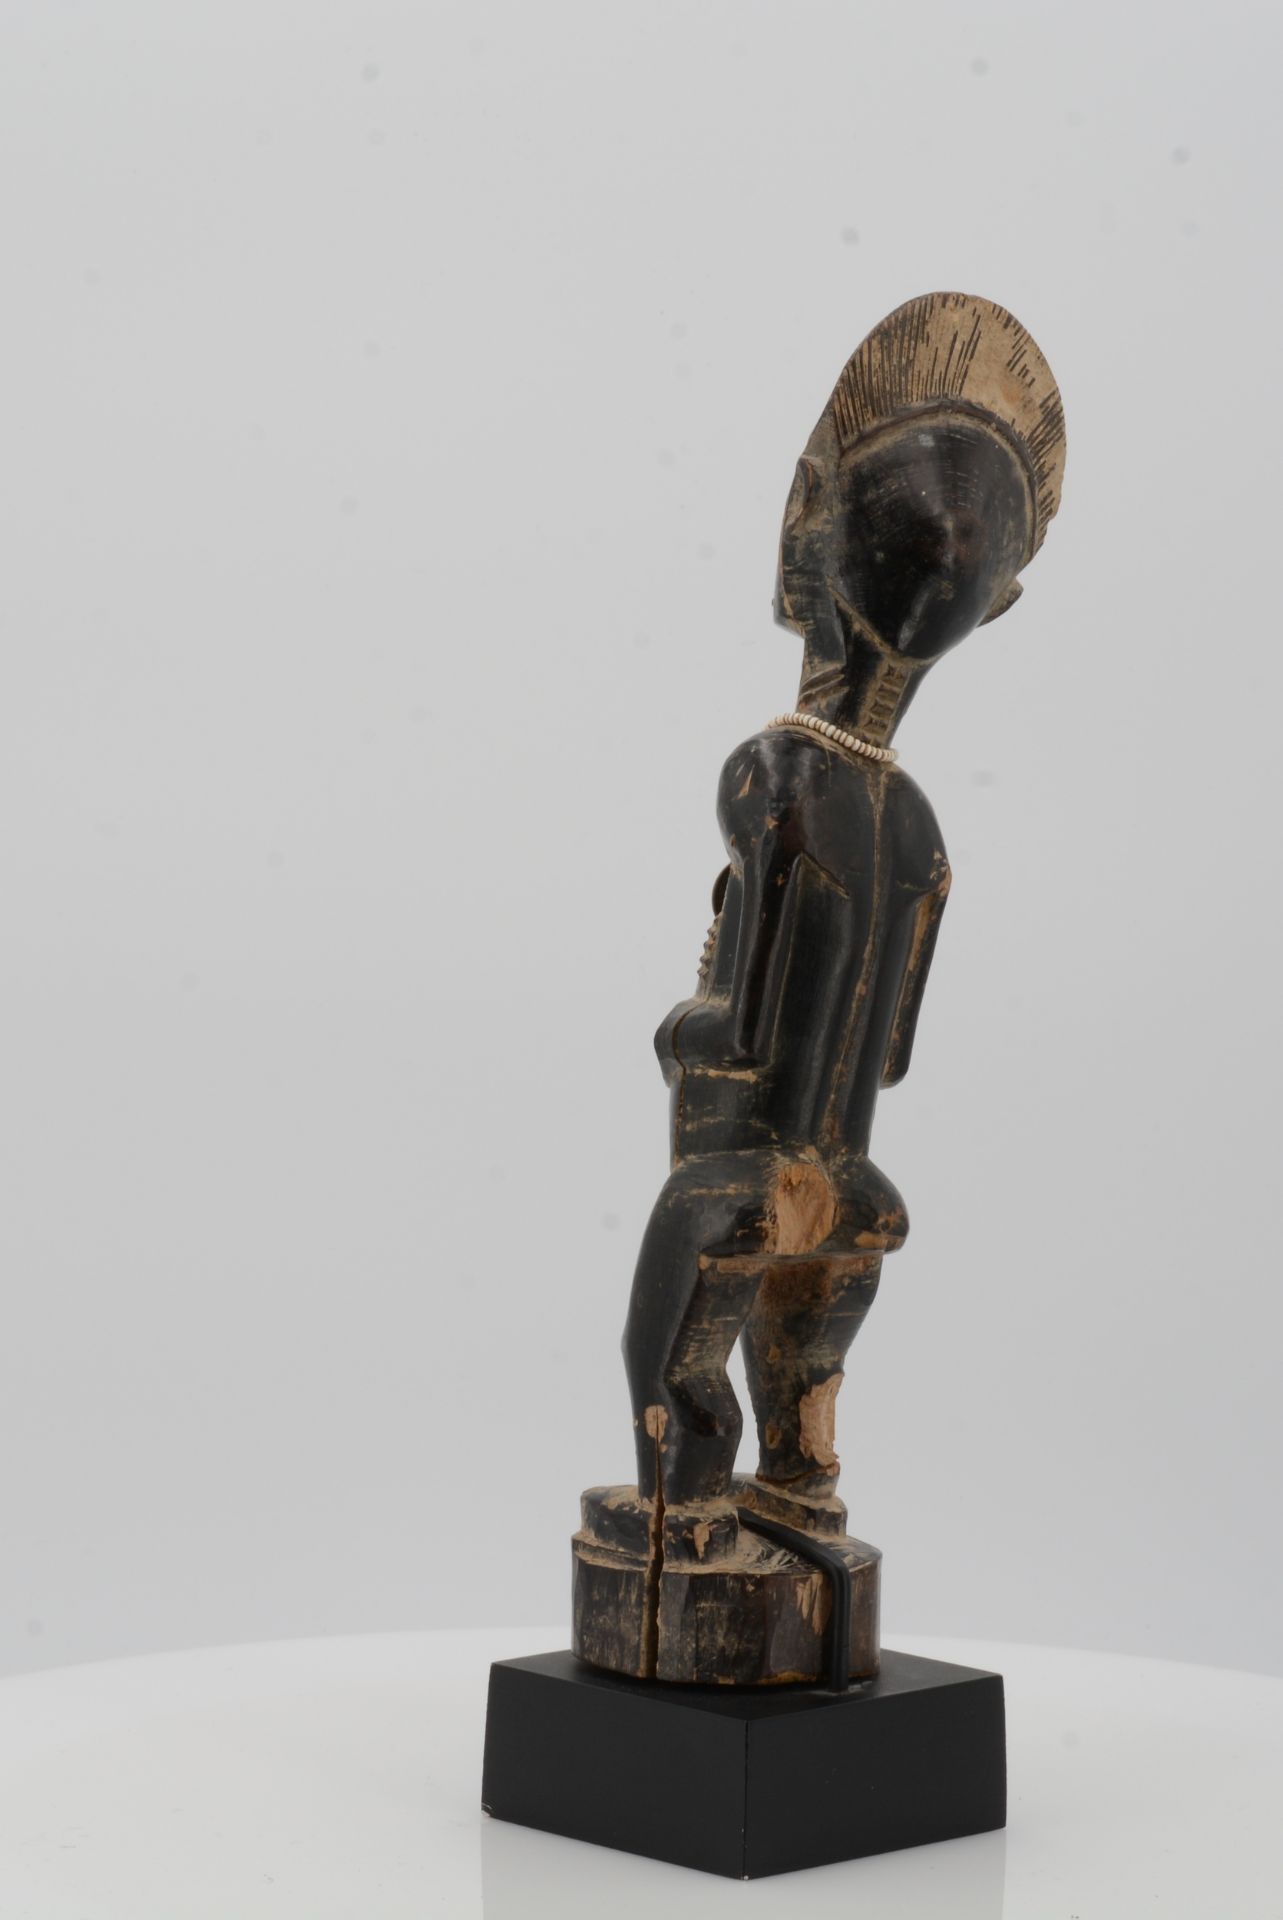 BAULE, Ivory Coast. Male figure. Wood, pearl necklace with a French coin (50 centimes), dark patina. - Bild 7 aus 9